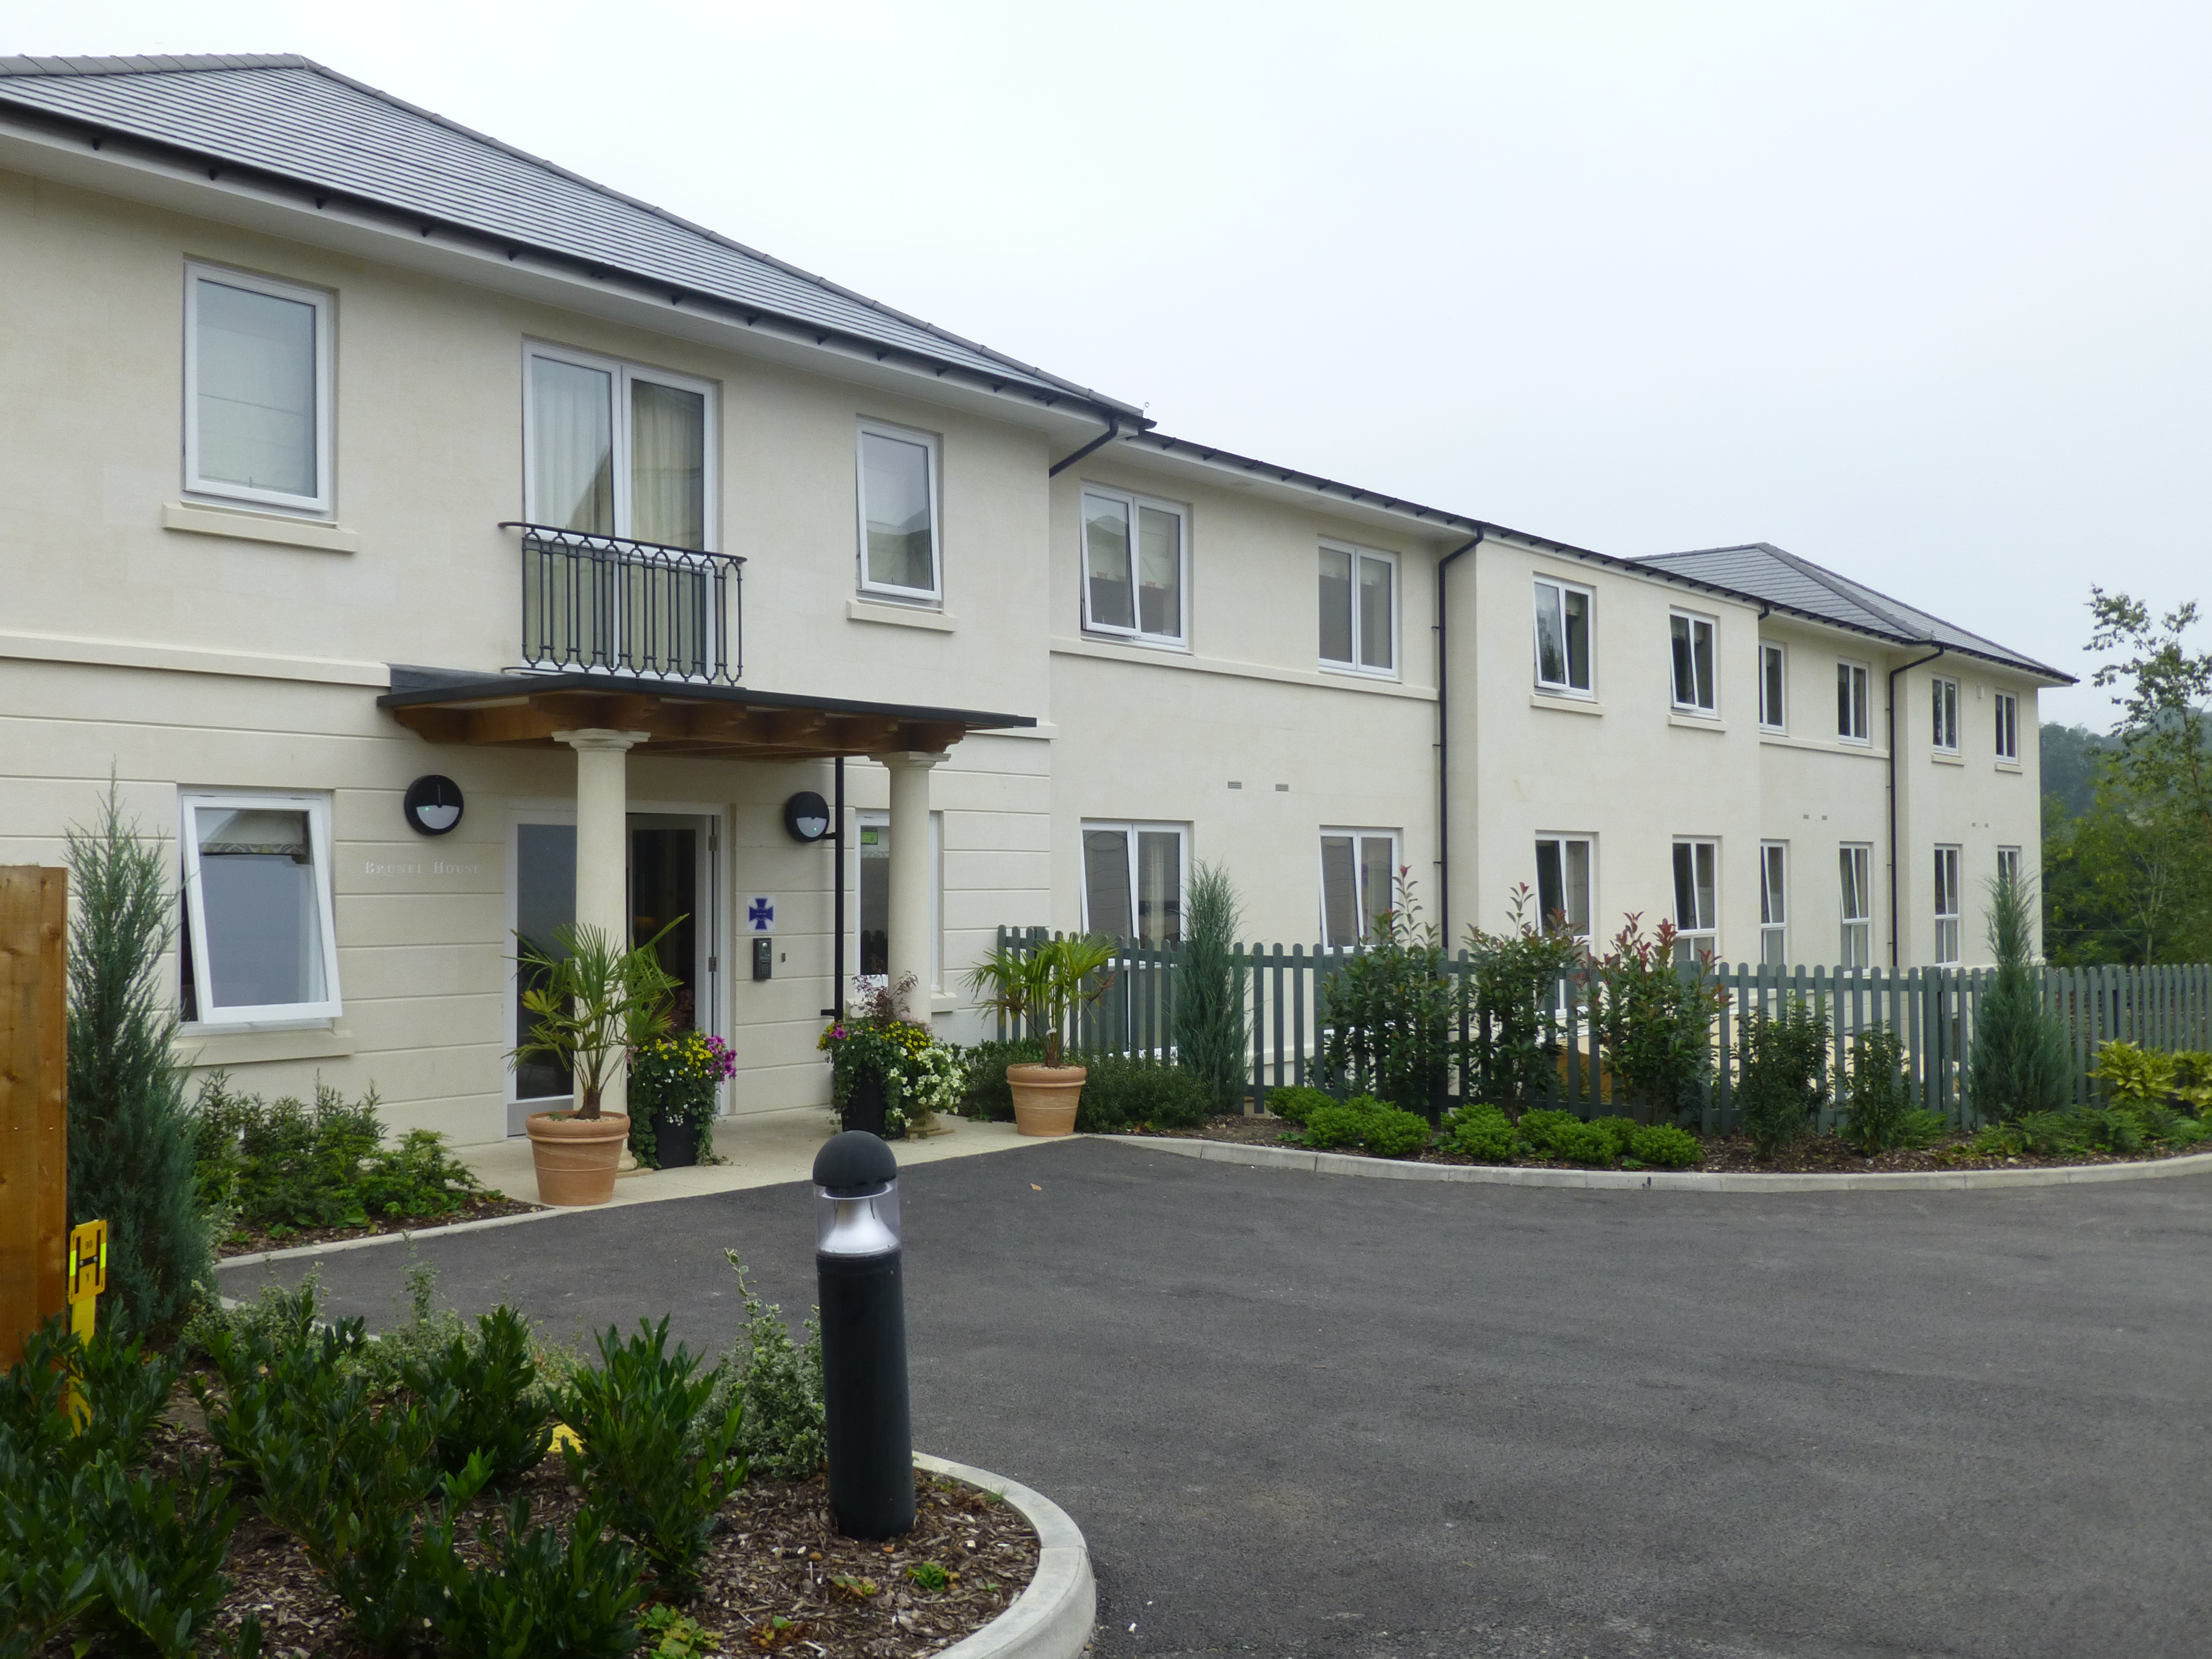 Wiltshire care home exterior